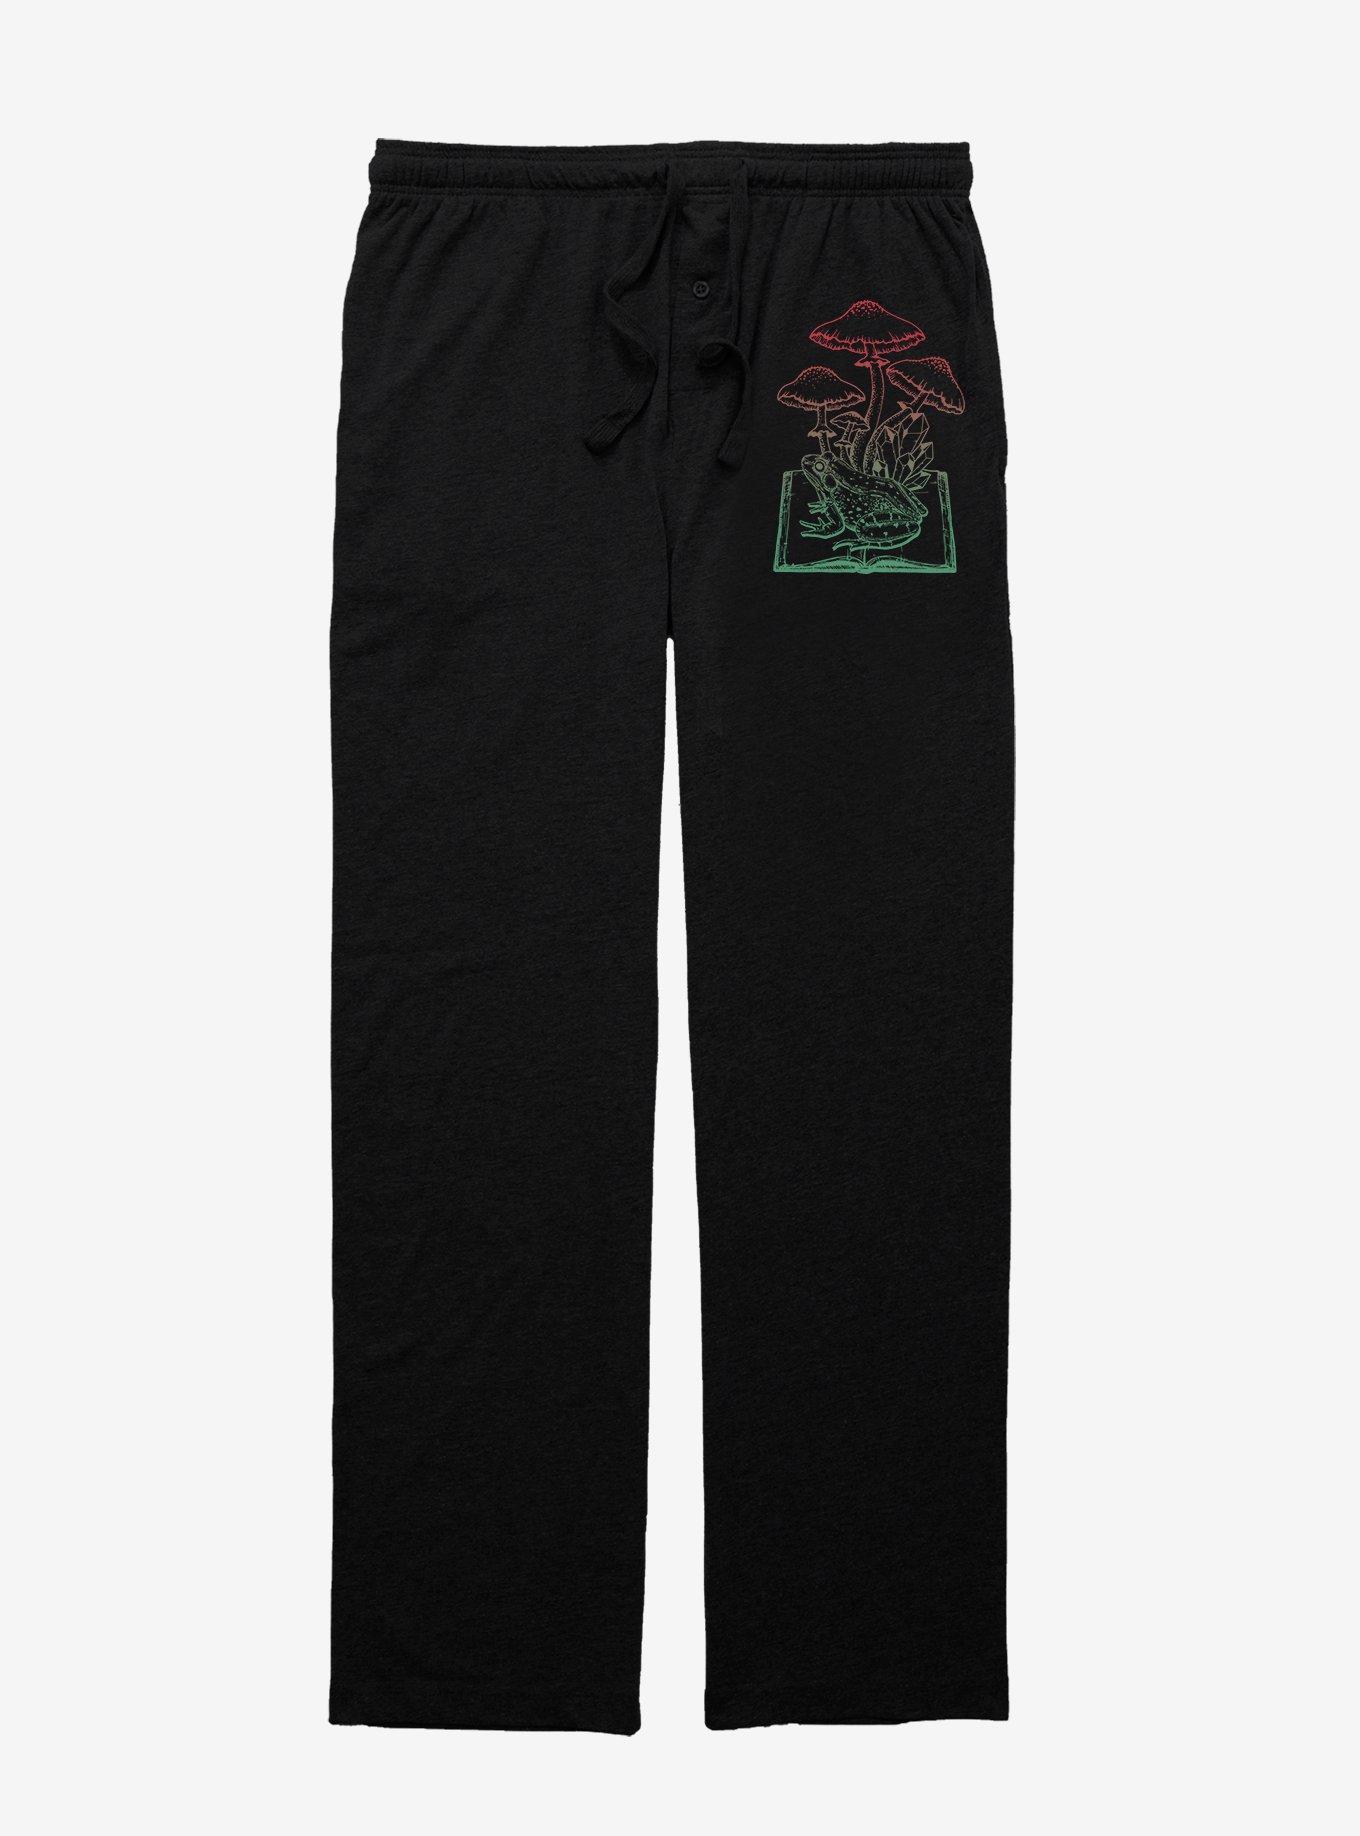 Trippin Out Of A Book Pajama Pants, BLACK, hi-res